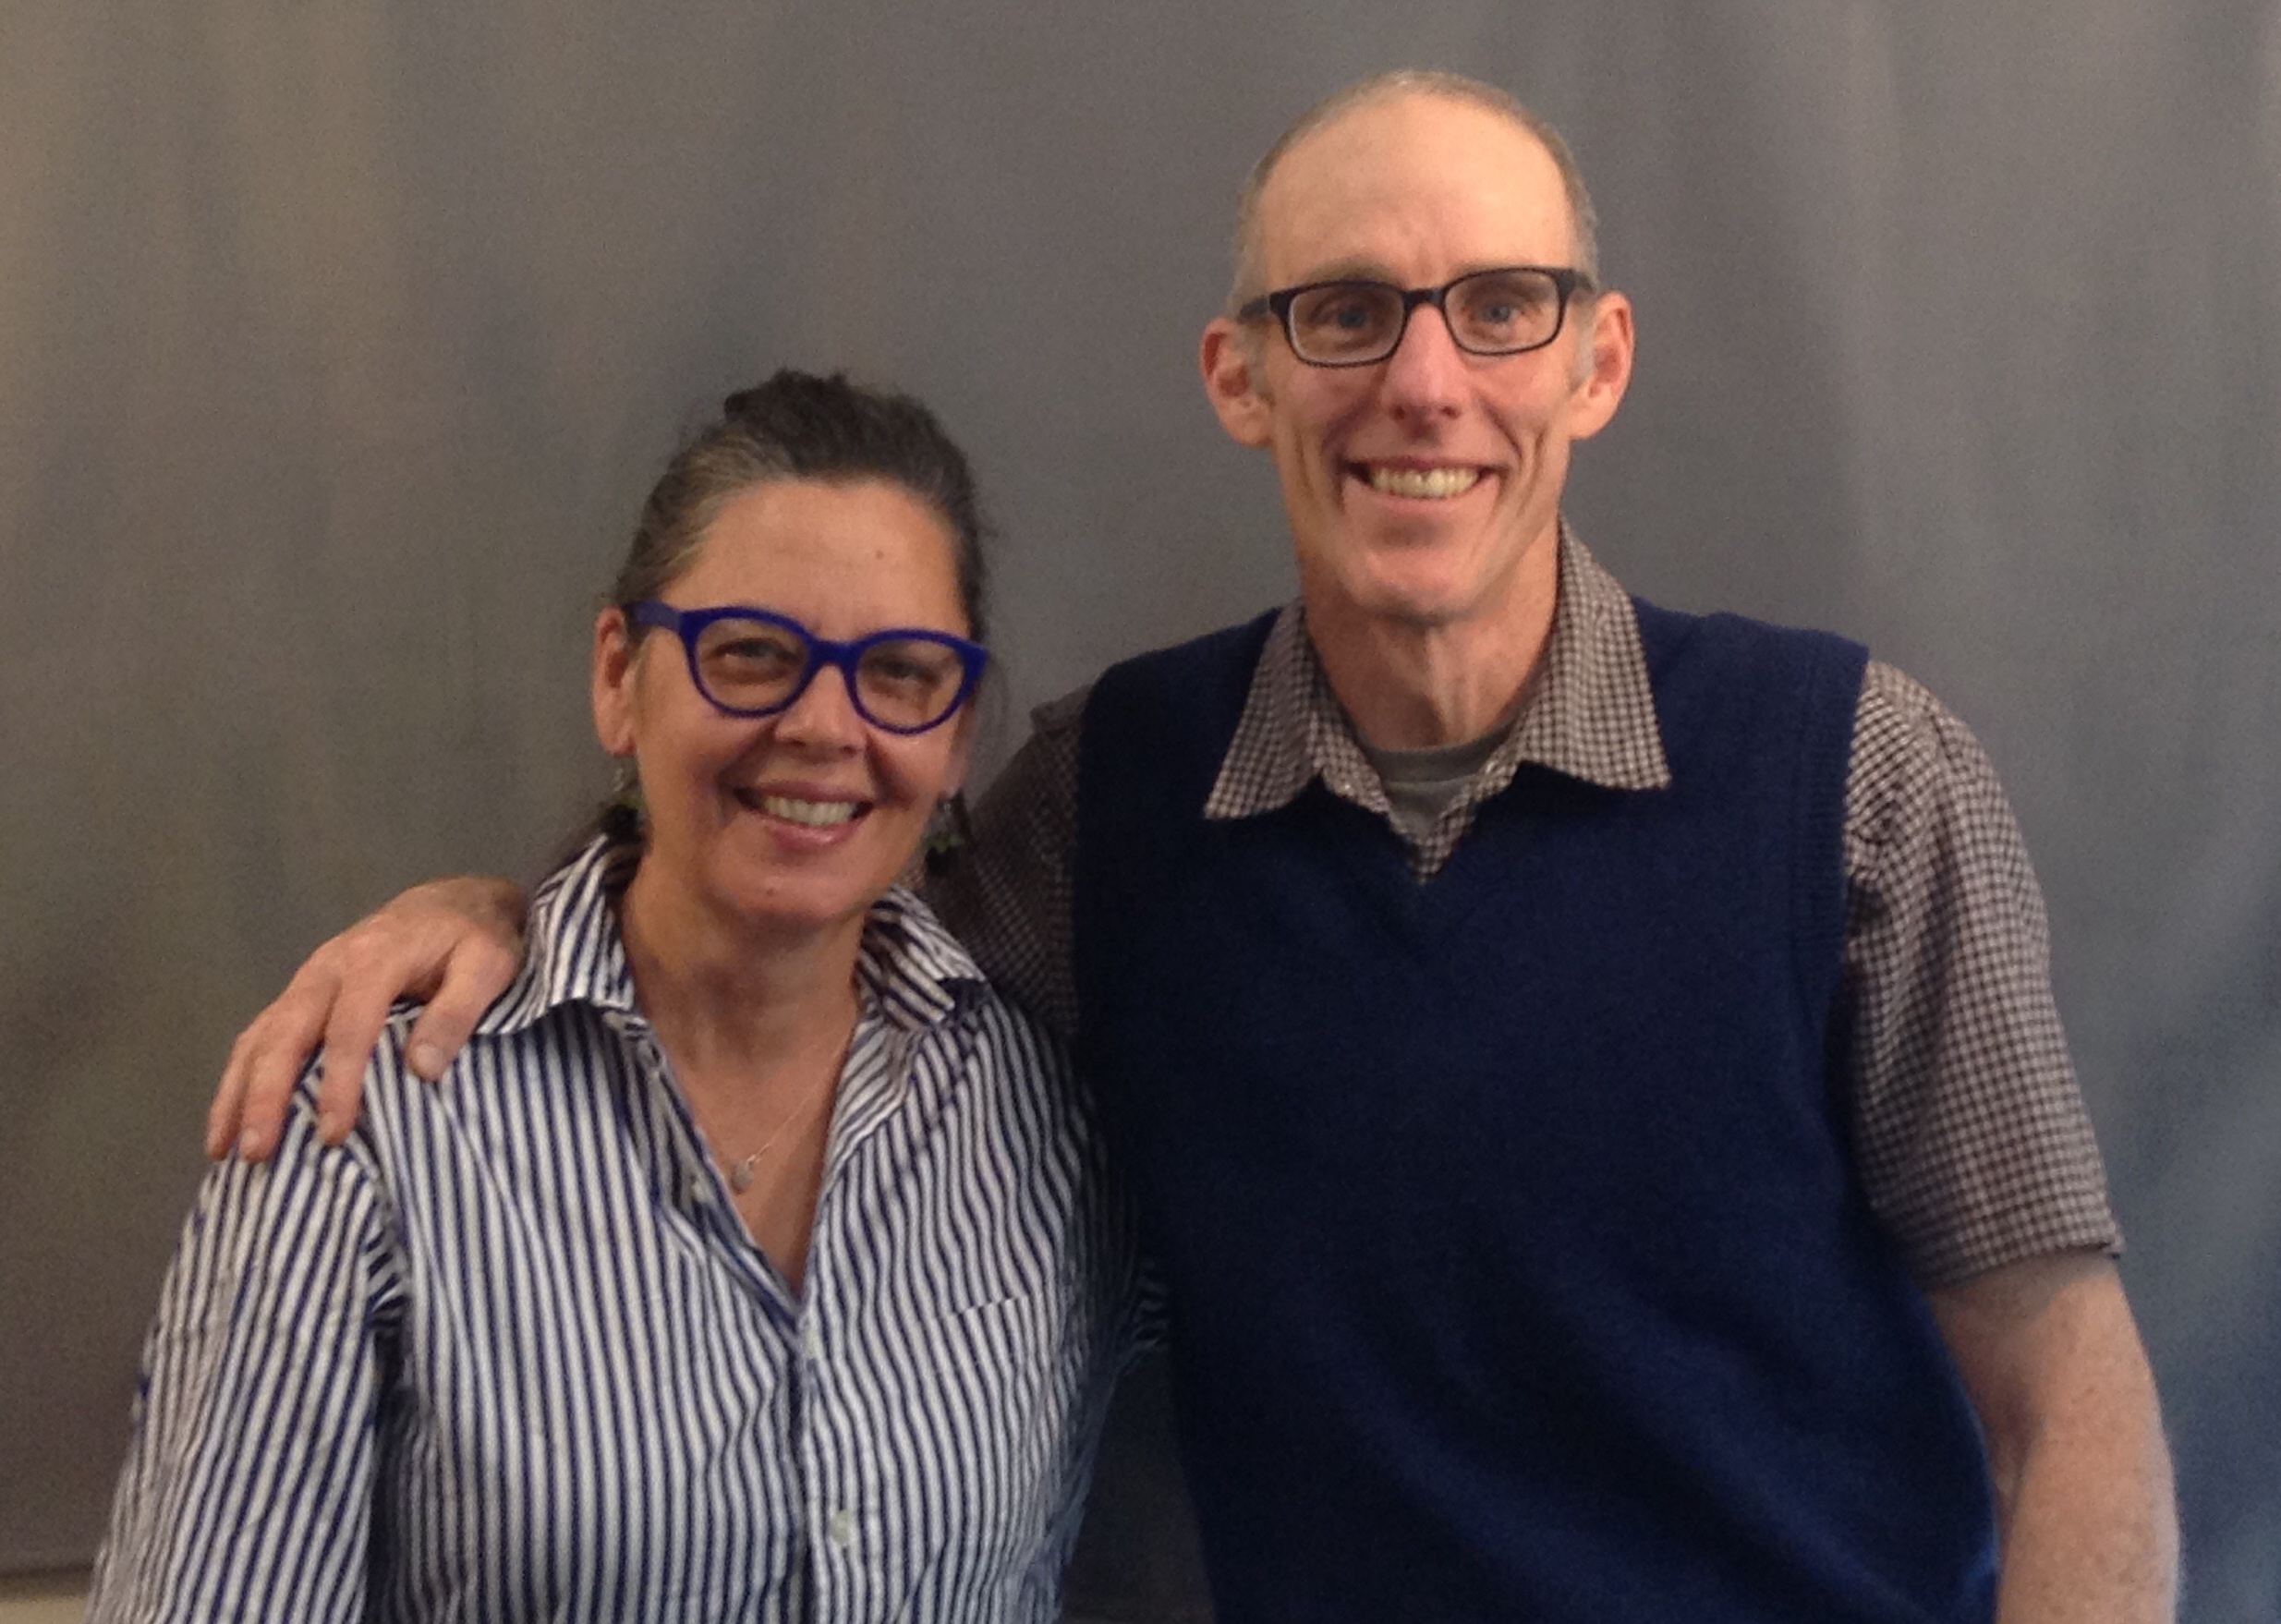 Robin_Hill_and_Andrew_Sullivan-cropped.jpg